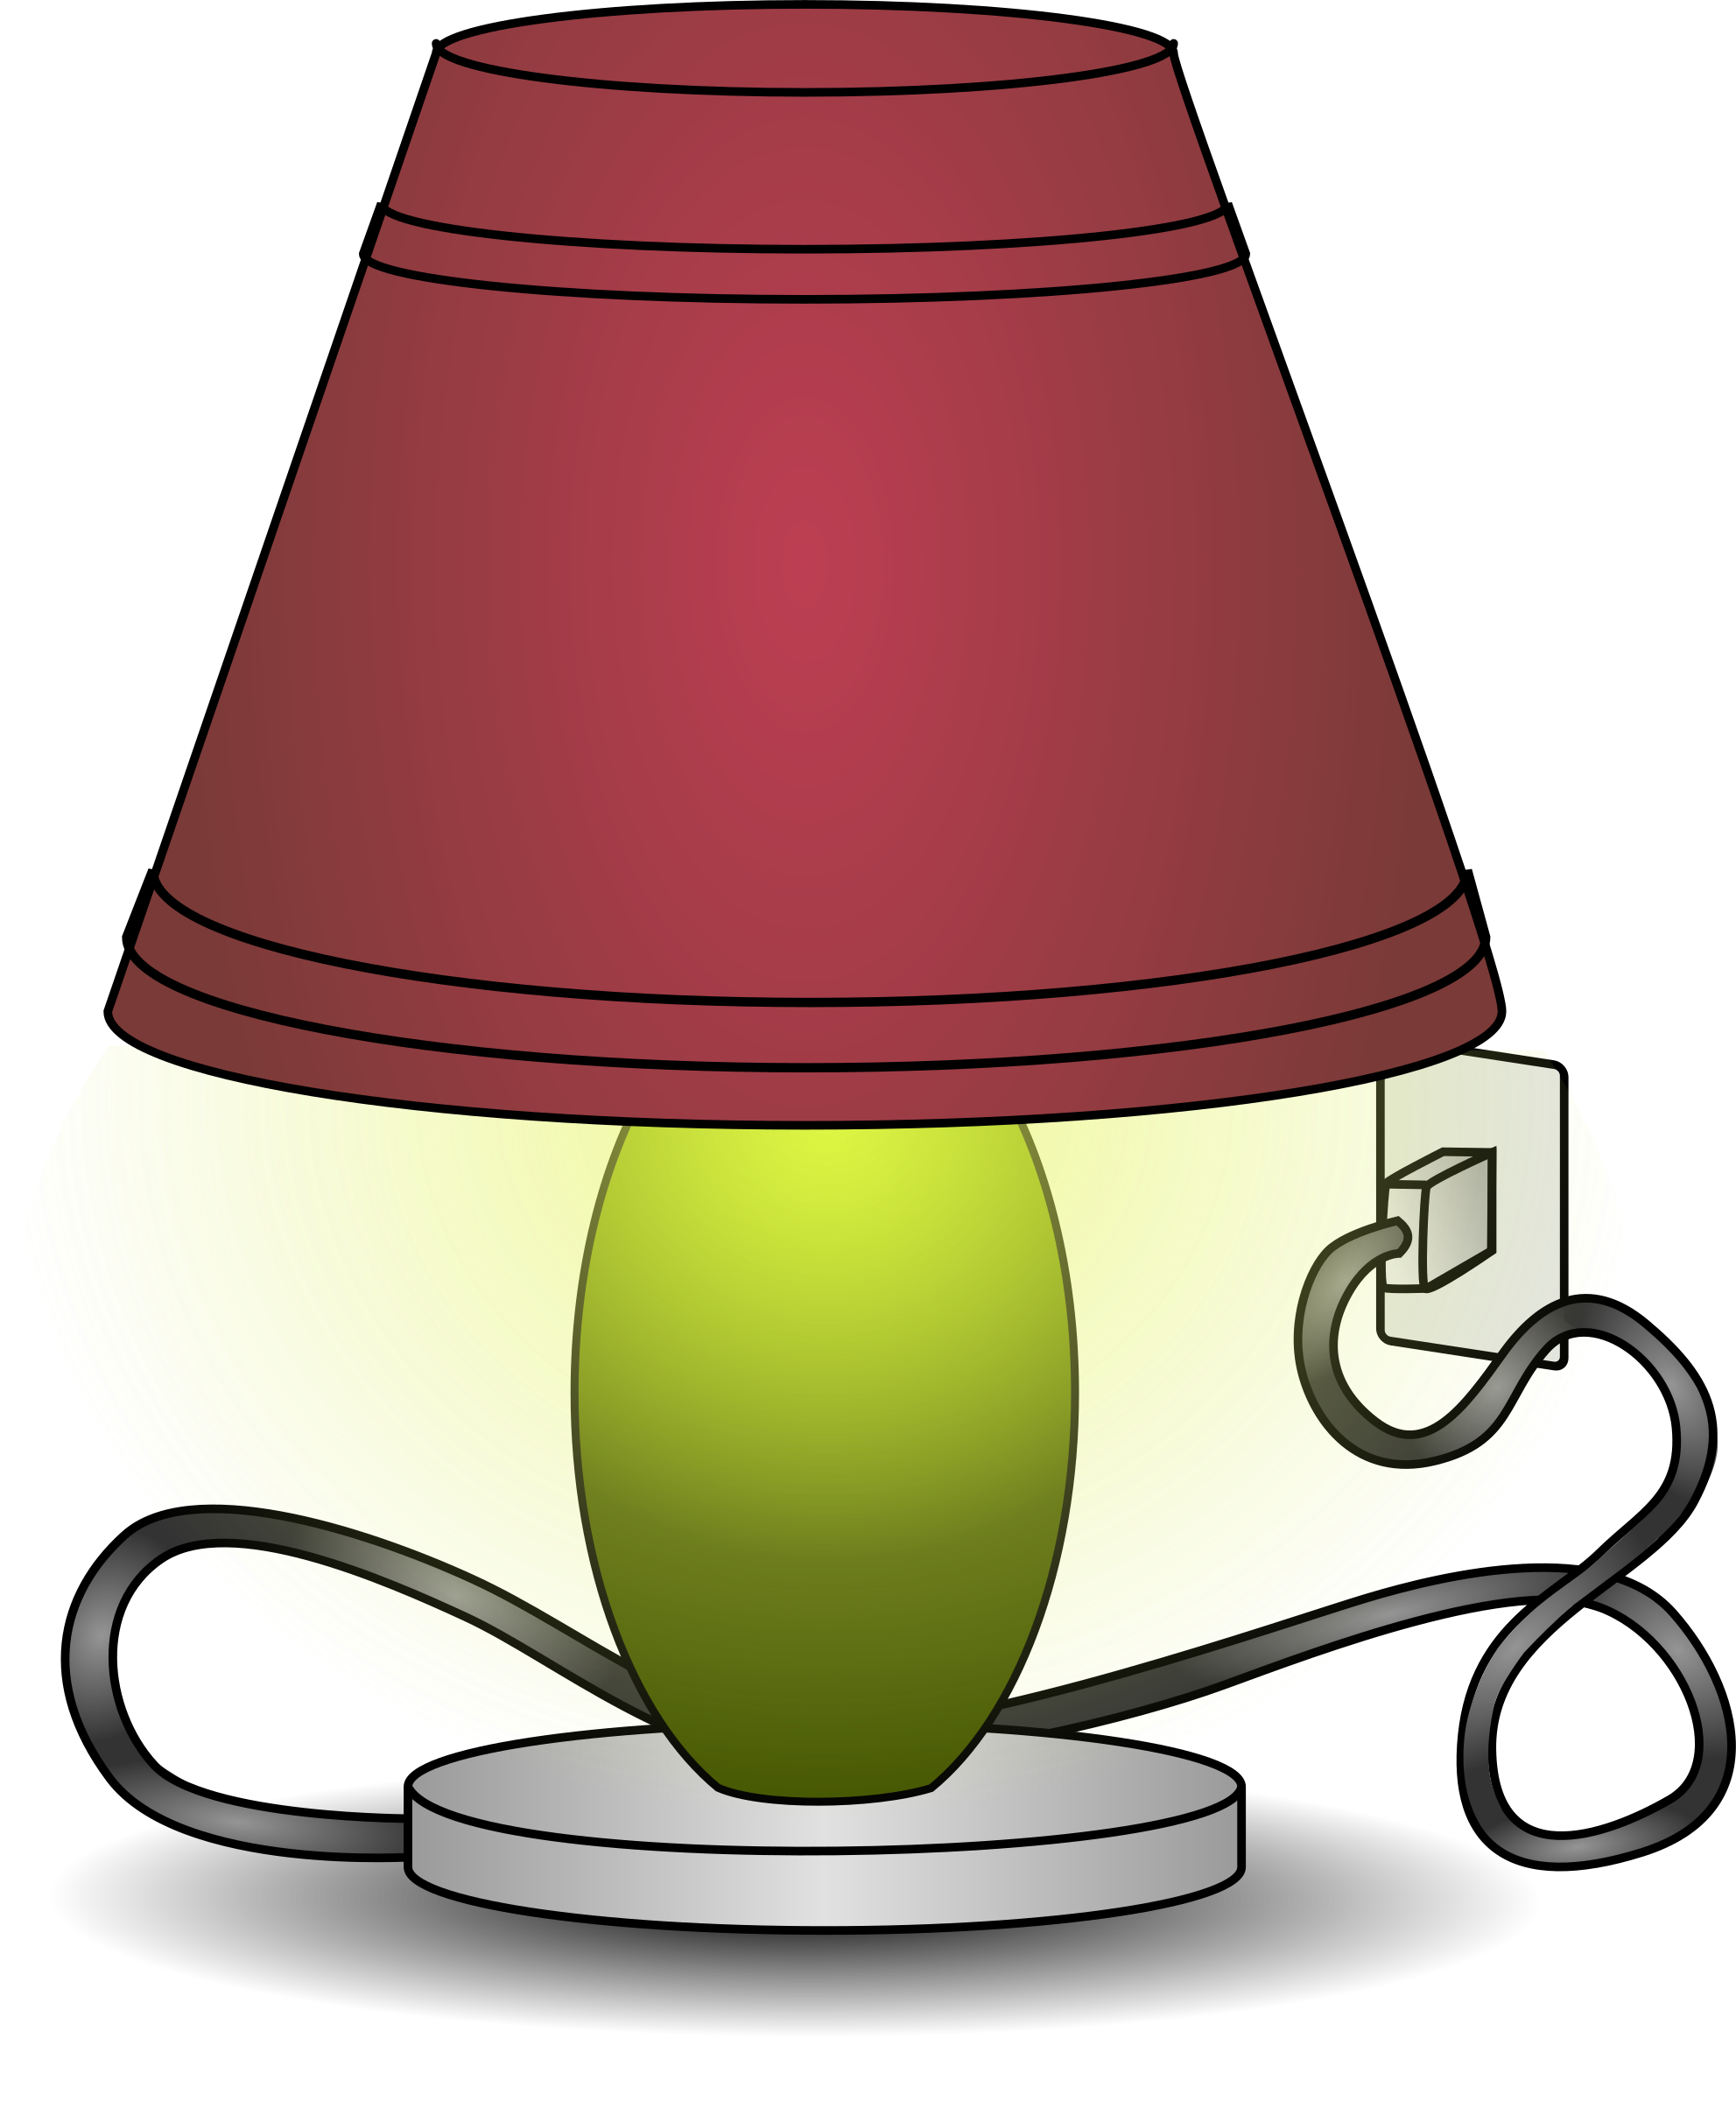 Lamp Meaning and Definition